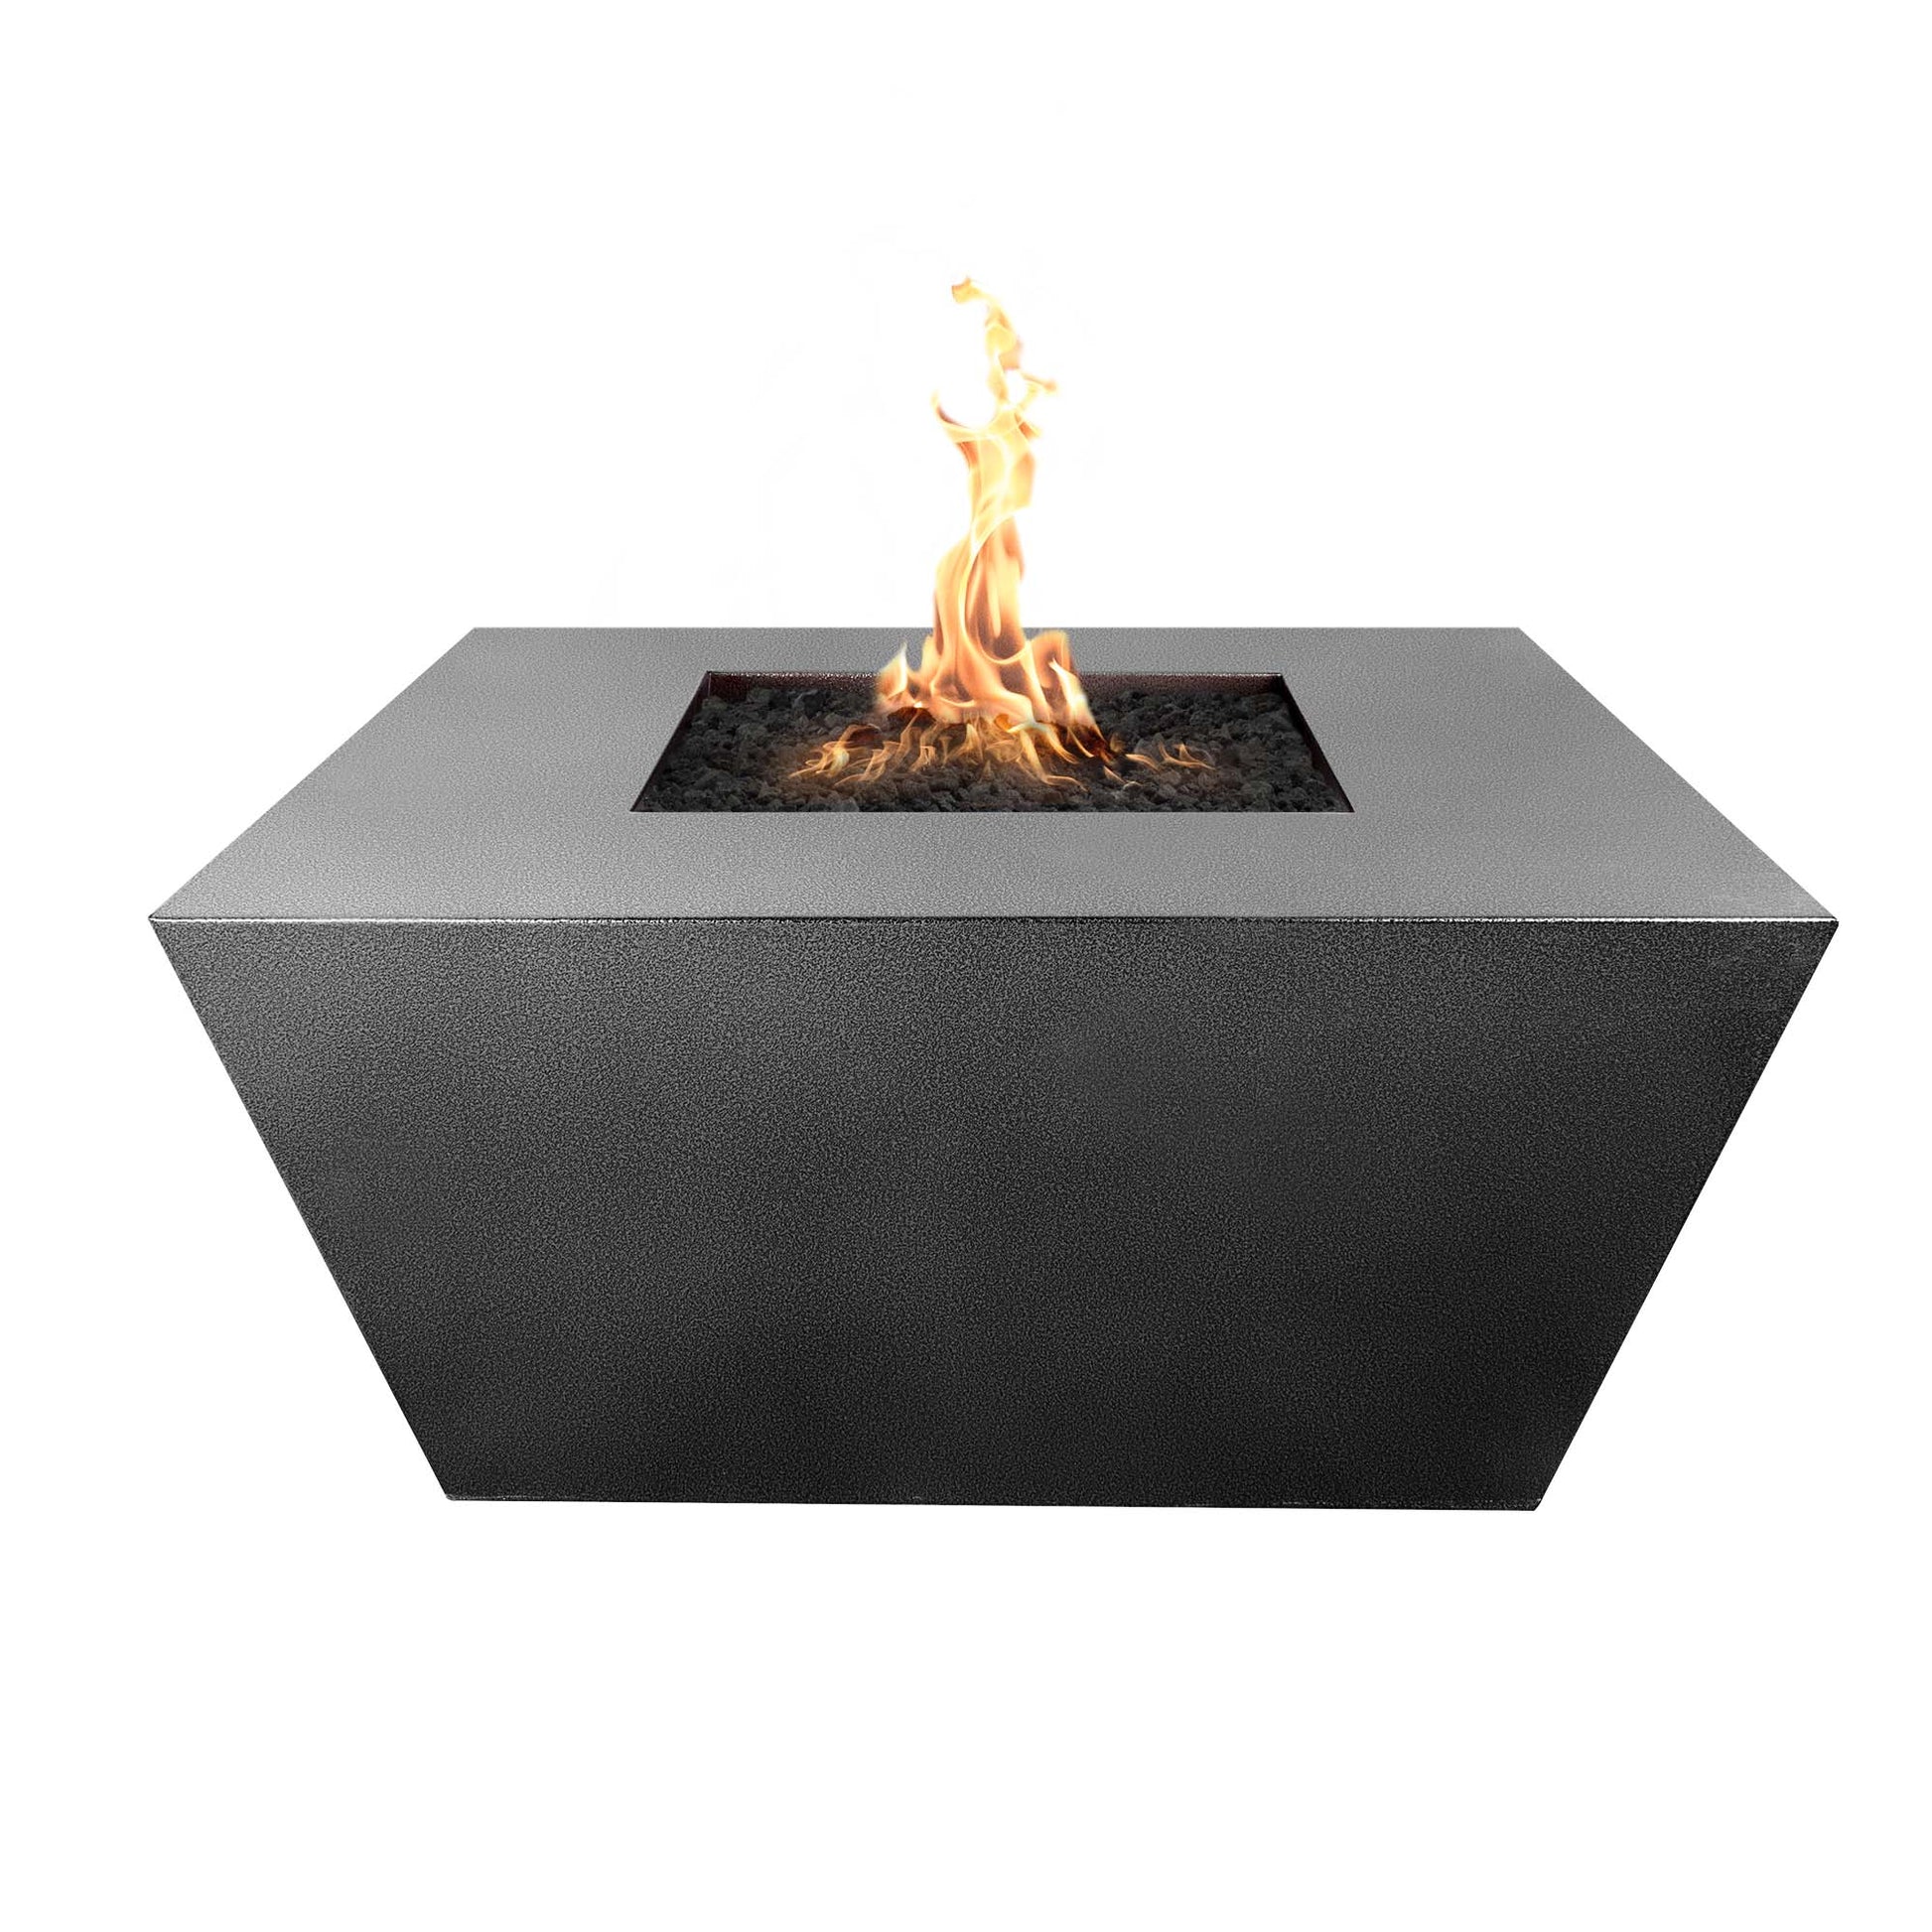 The Outdoor Plus Square Redan 48" Copper Vein Powder Coated Metal Natural Gas Fire Pit with Match Lit Ignition